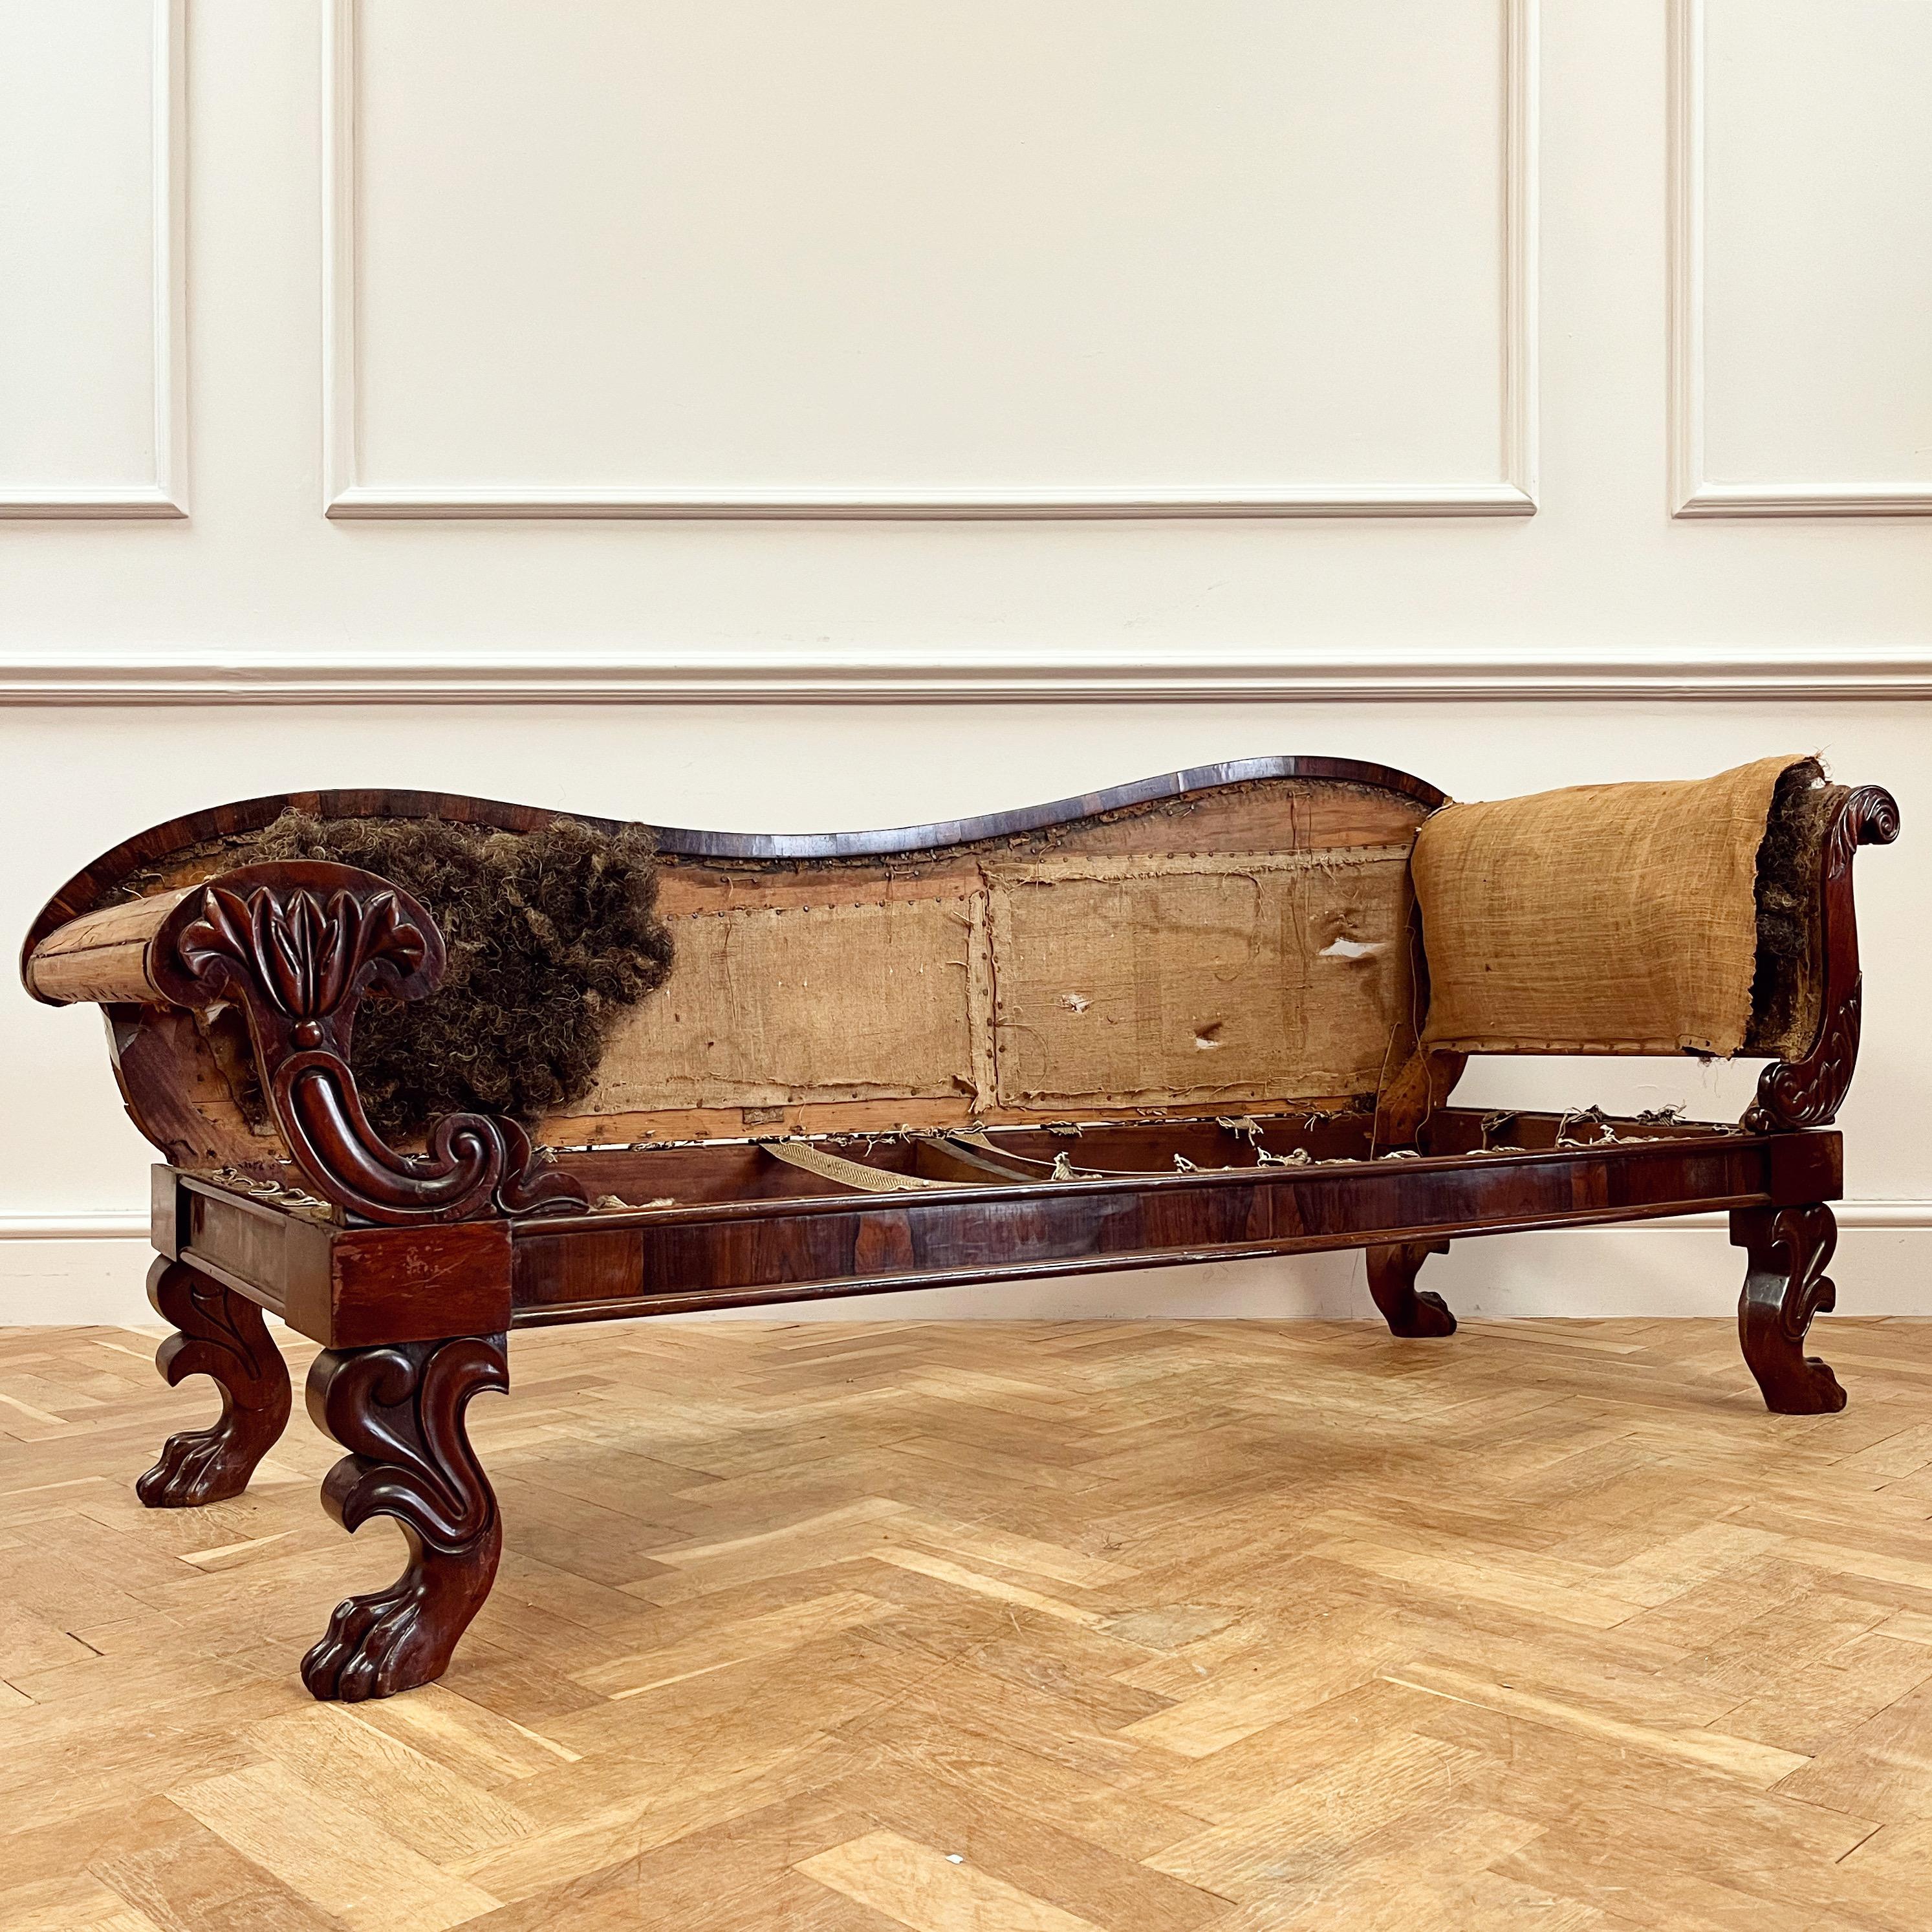 An Indian late George IV mahogany sofa, with shaped back and arms of scrolling acanthus leaves and standing on four lively lion paw feet. 

Price includes upholstery ex fabric.